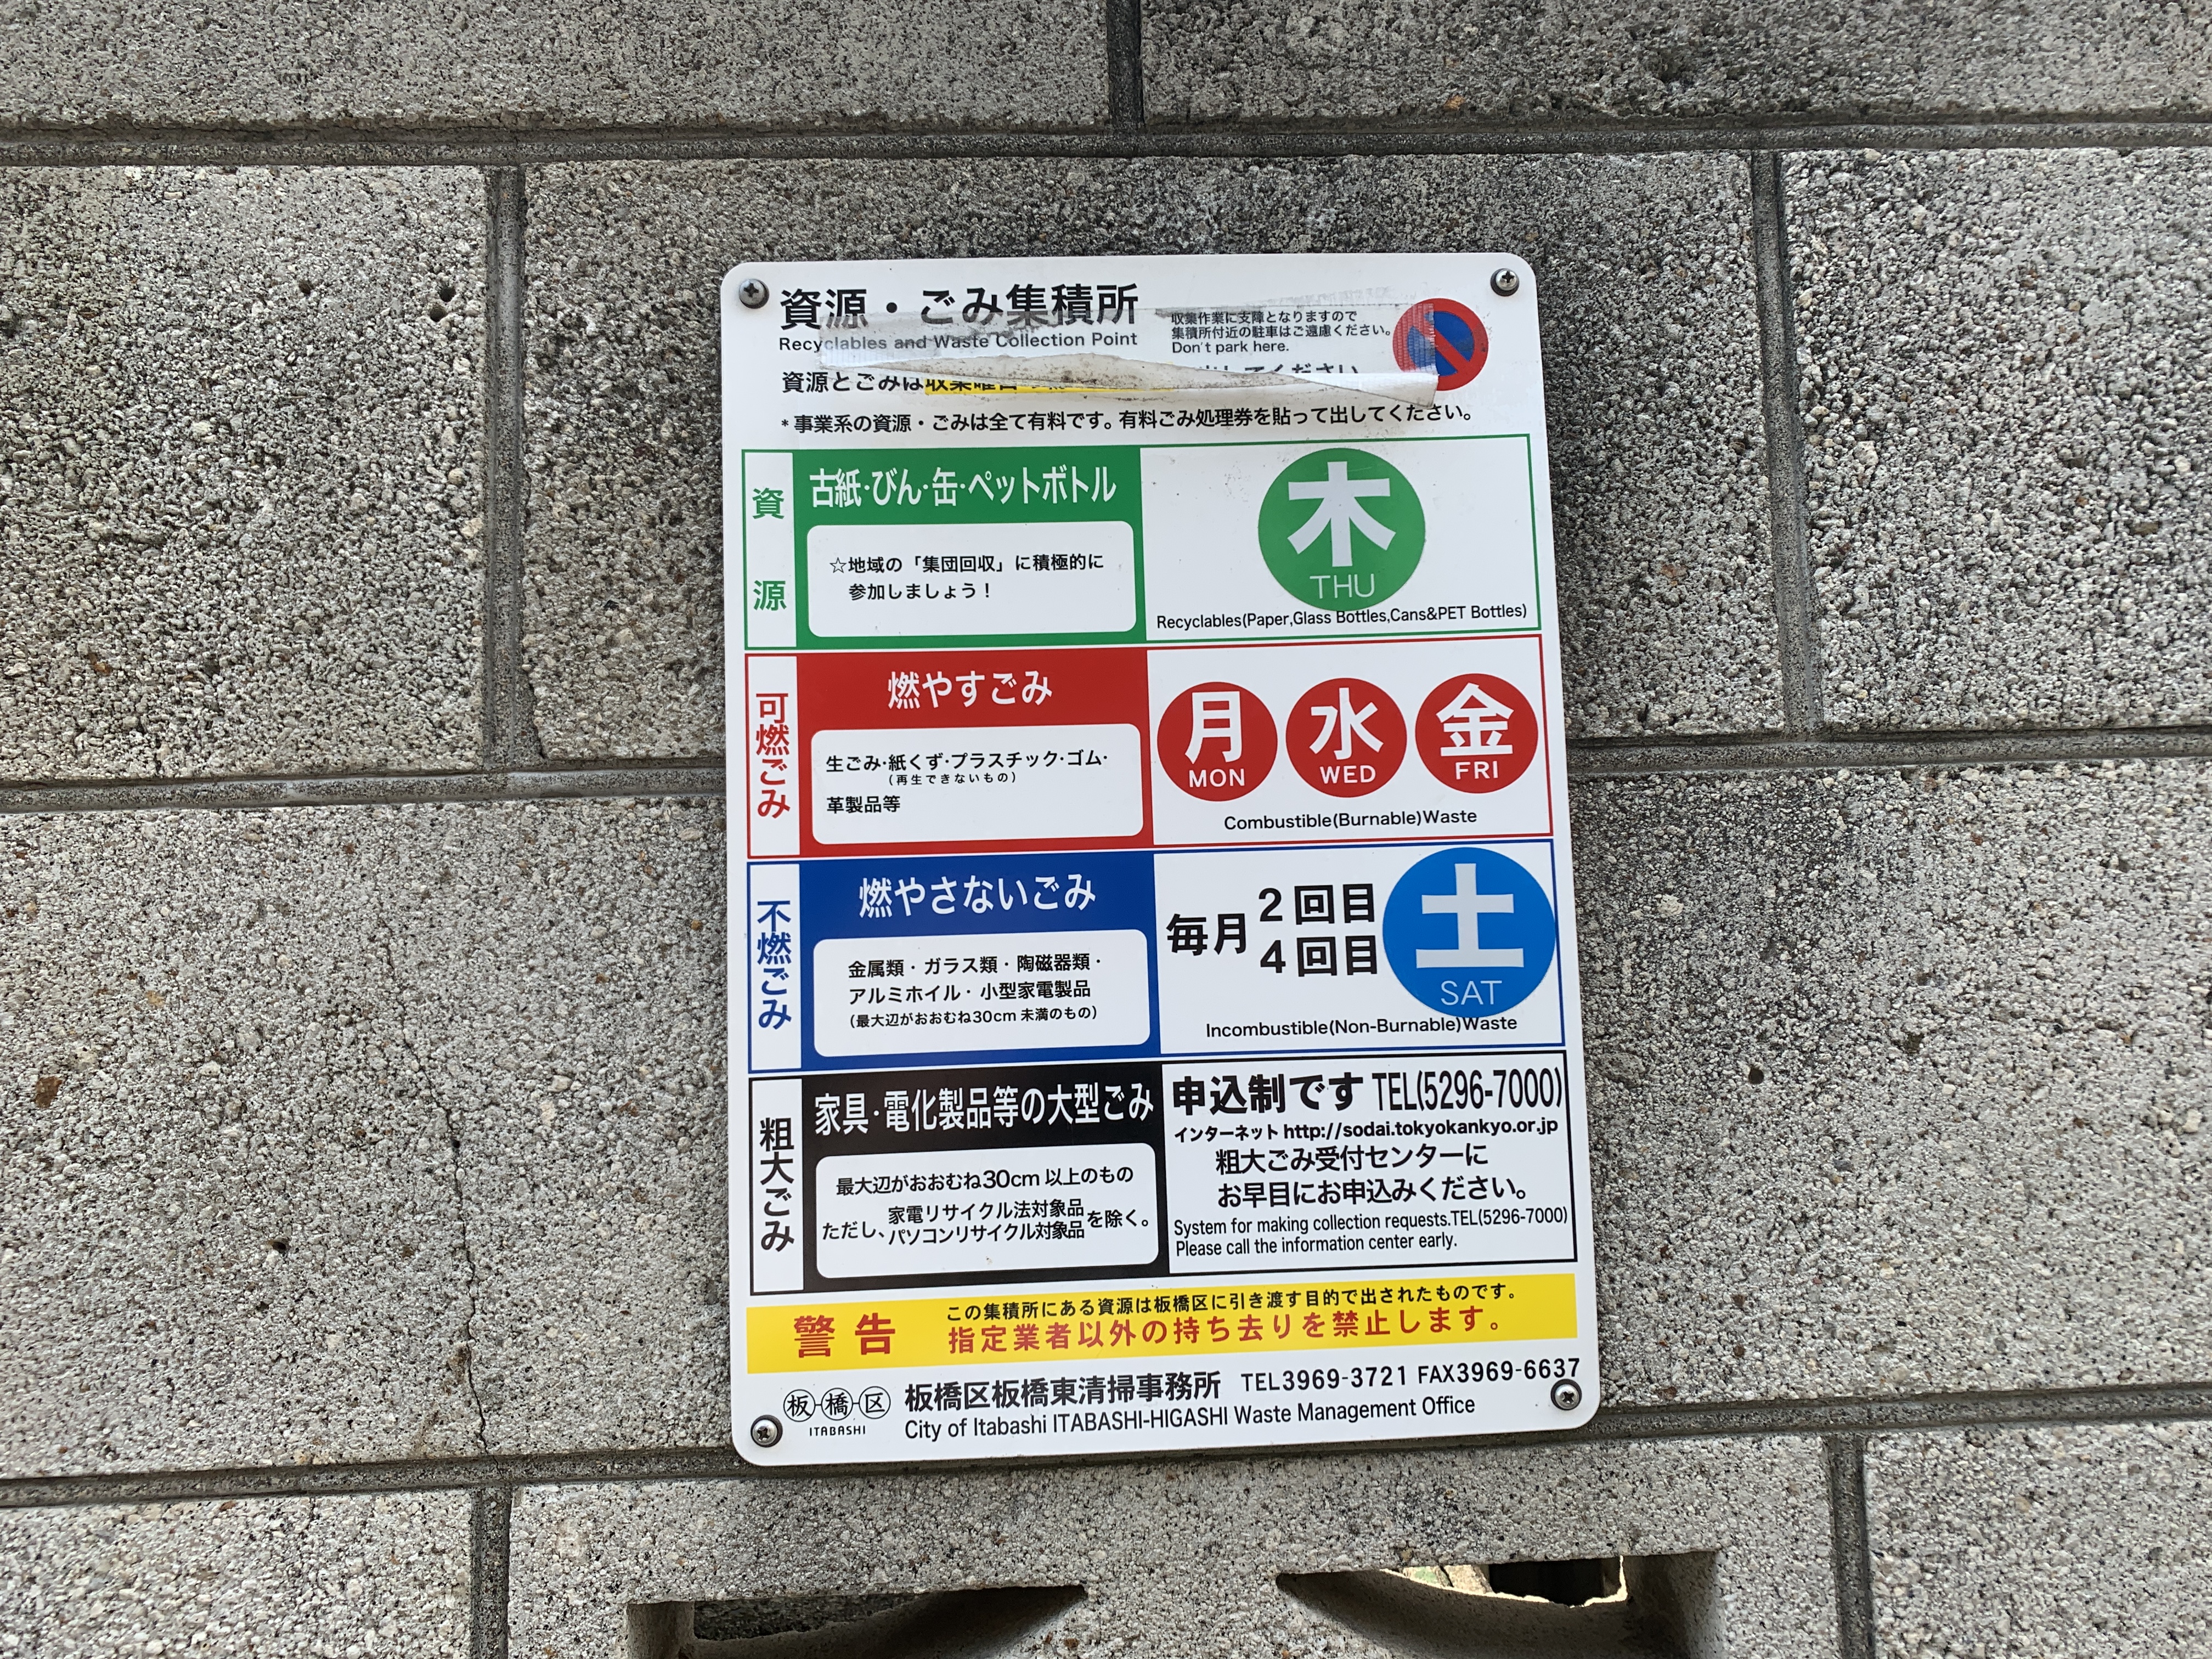 Garbage Disposal and Recycling in Japan